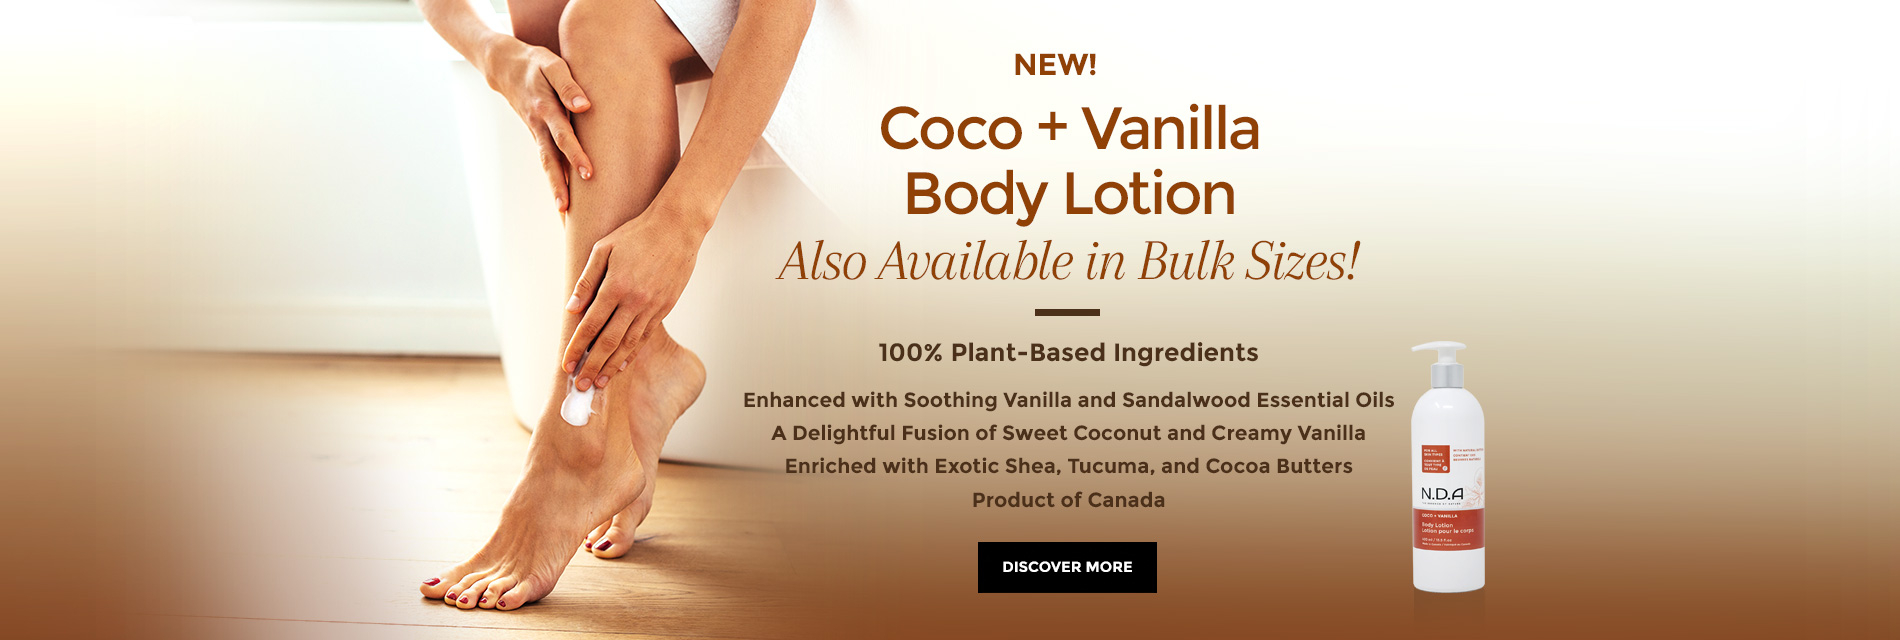 Coco + Vanilla Body Lotion - Enriched With Exotic Shea, Tucuma, and Cocoa Butters